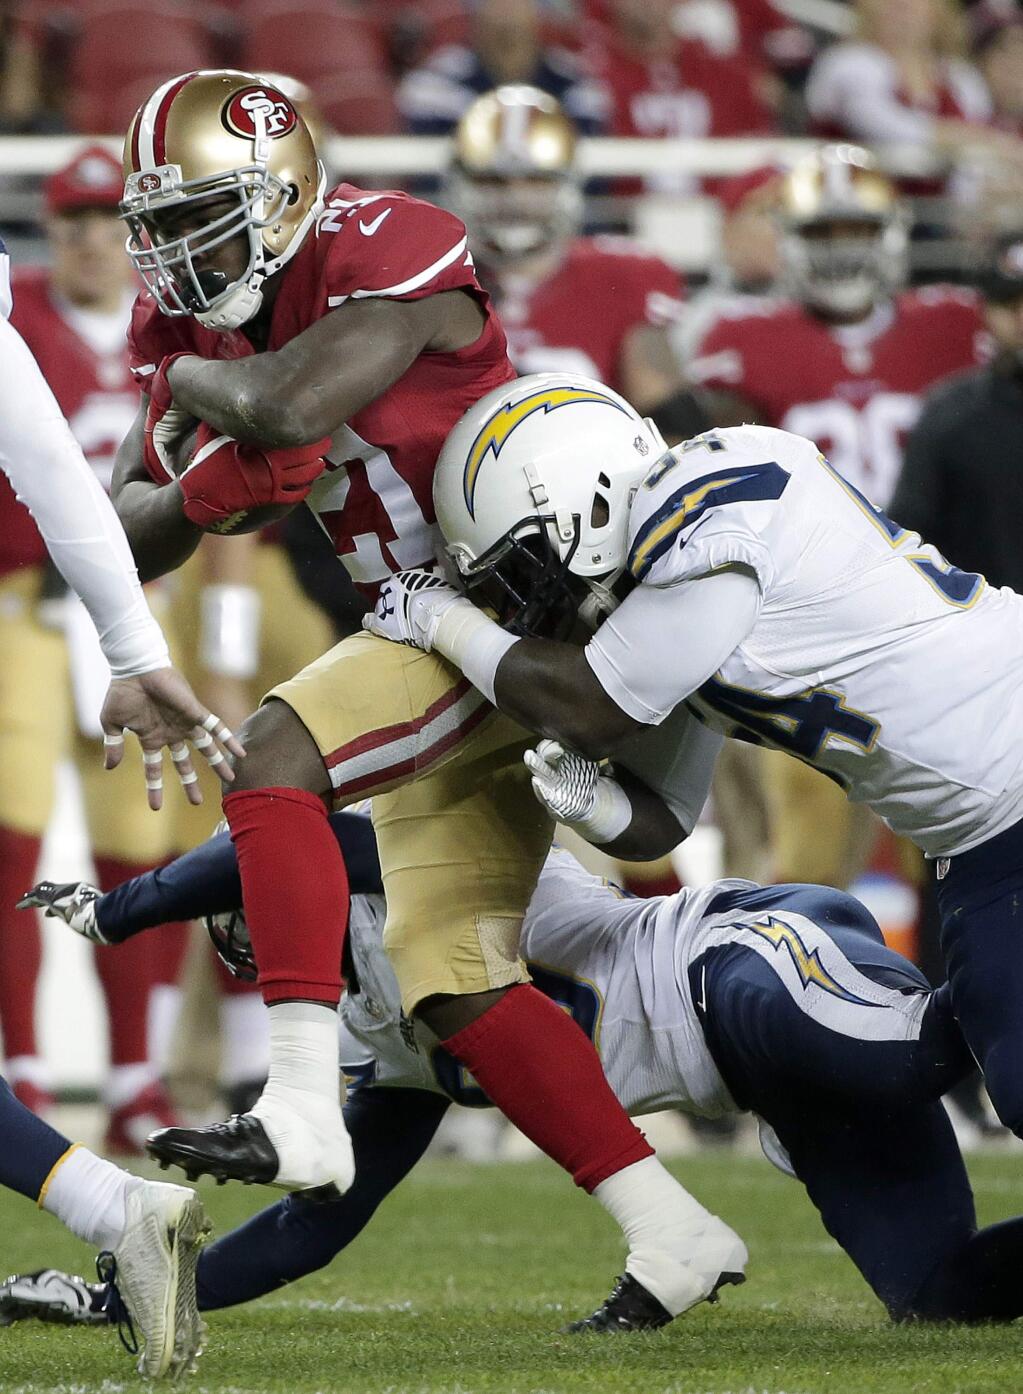 San Francisco 49ers running back Frank Gore (21) runs past San Diego Chargers outside linebacker Melvin Ingram to score on a 52-yard touchdown run during the first quarter of an NFL football game in Santa Clara, Calif., Saturday, Dec. 20, 2014. (AP Photo/Marcio Jose Sanchez)